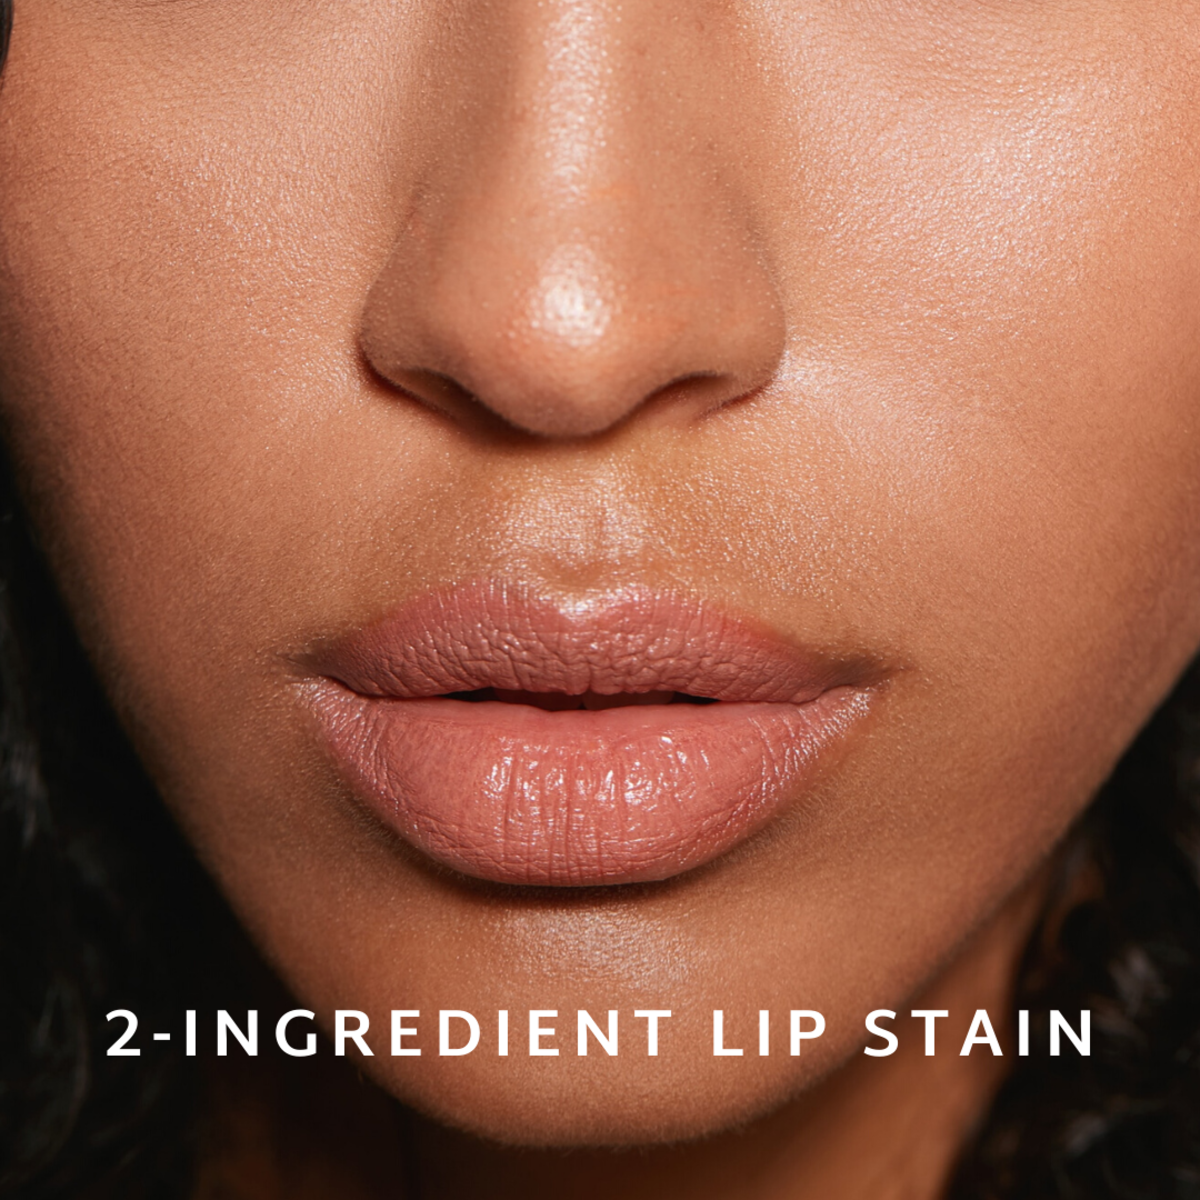 A simple, two-ingredient lip stain recipe can do wonders for your look.